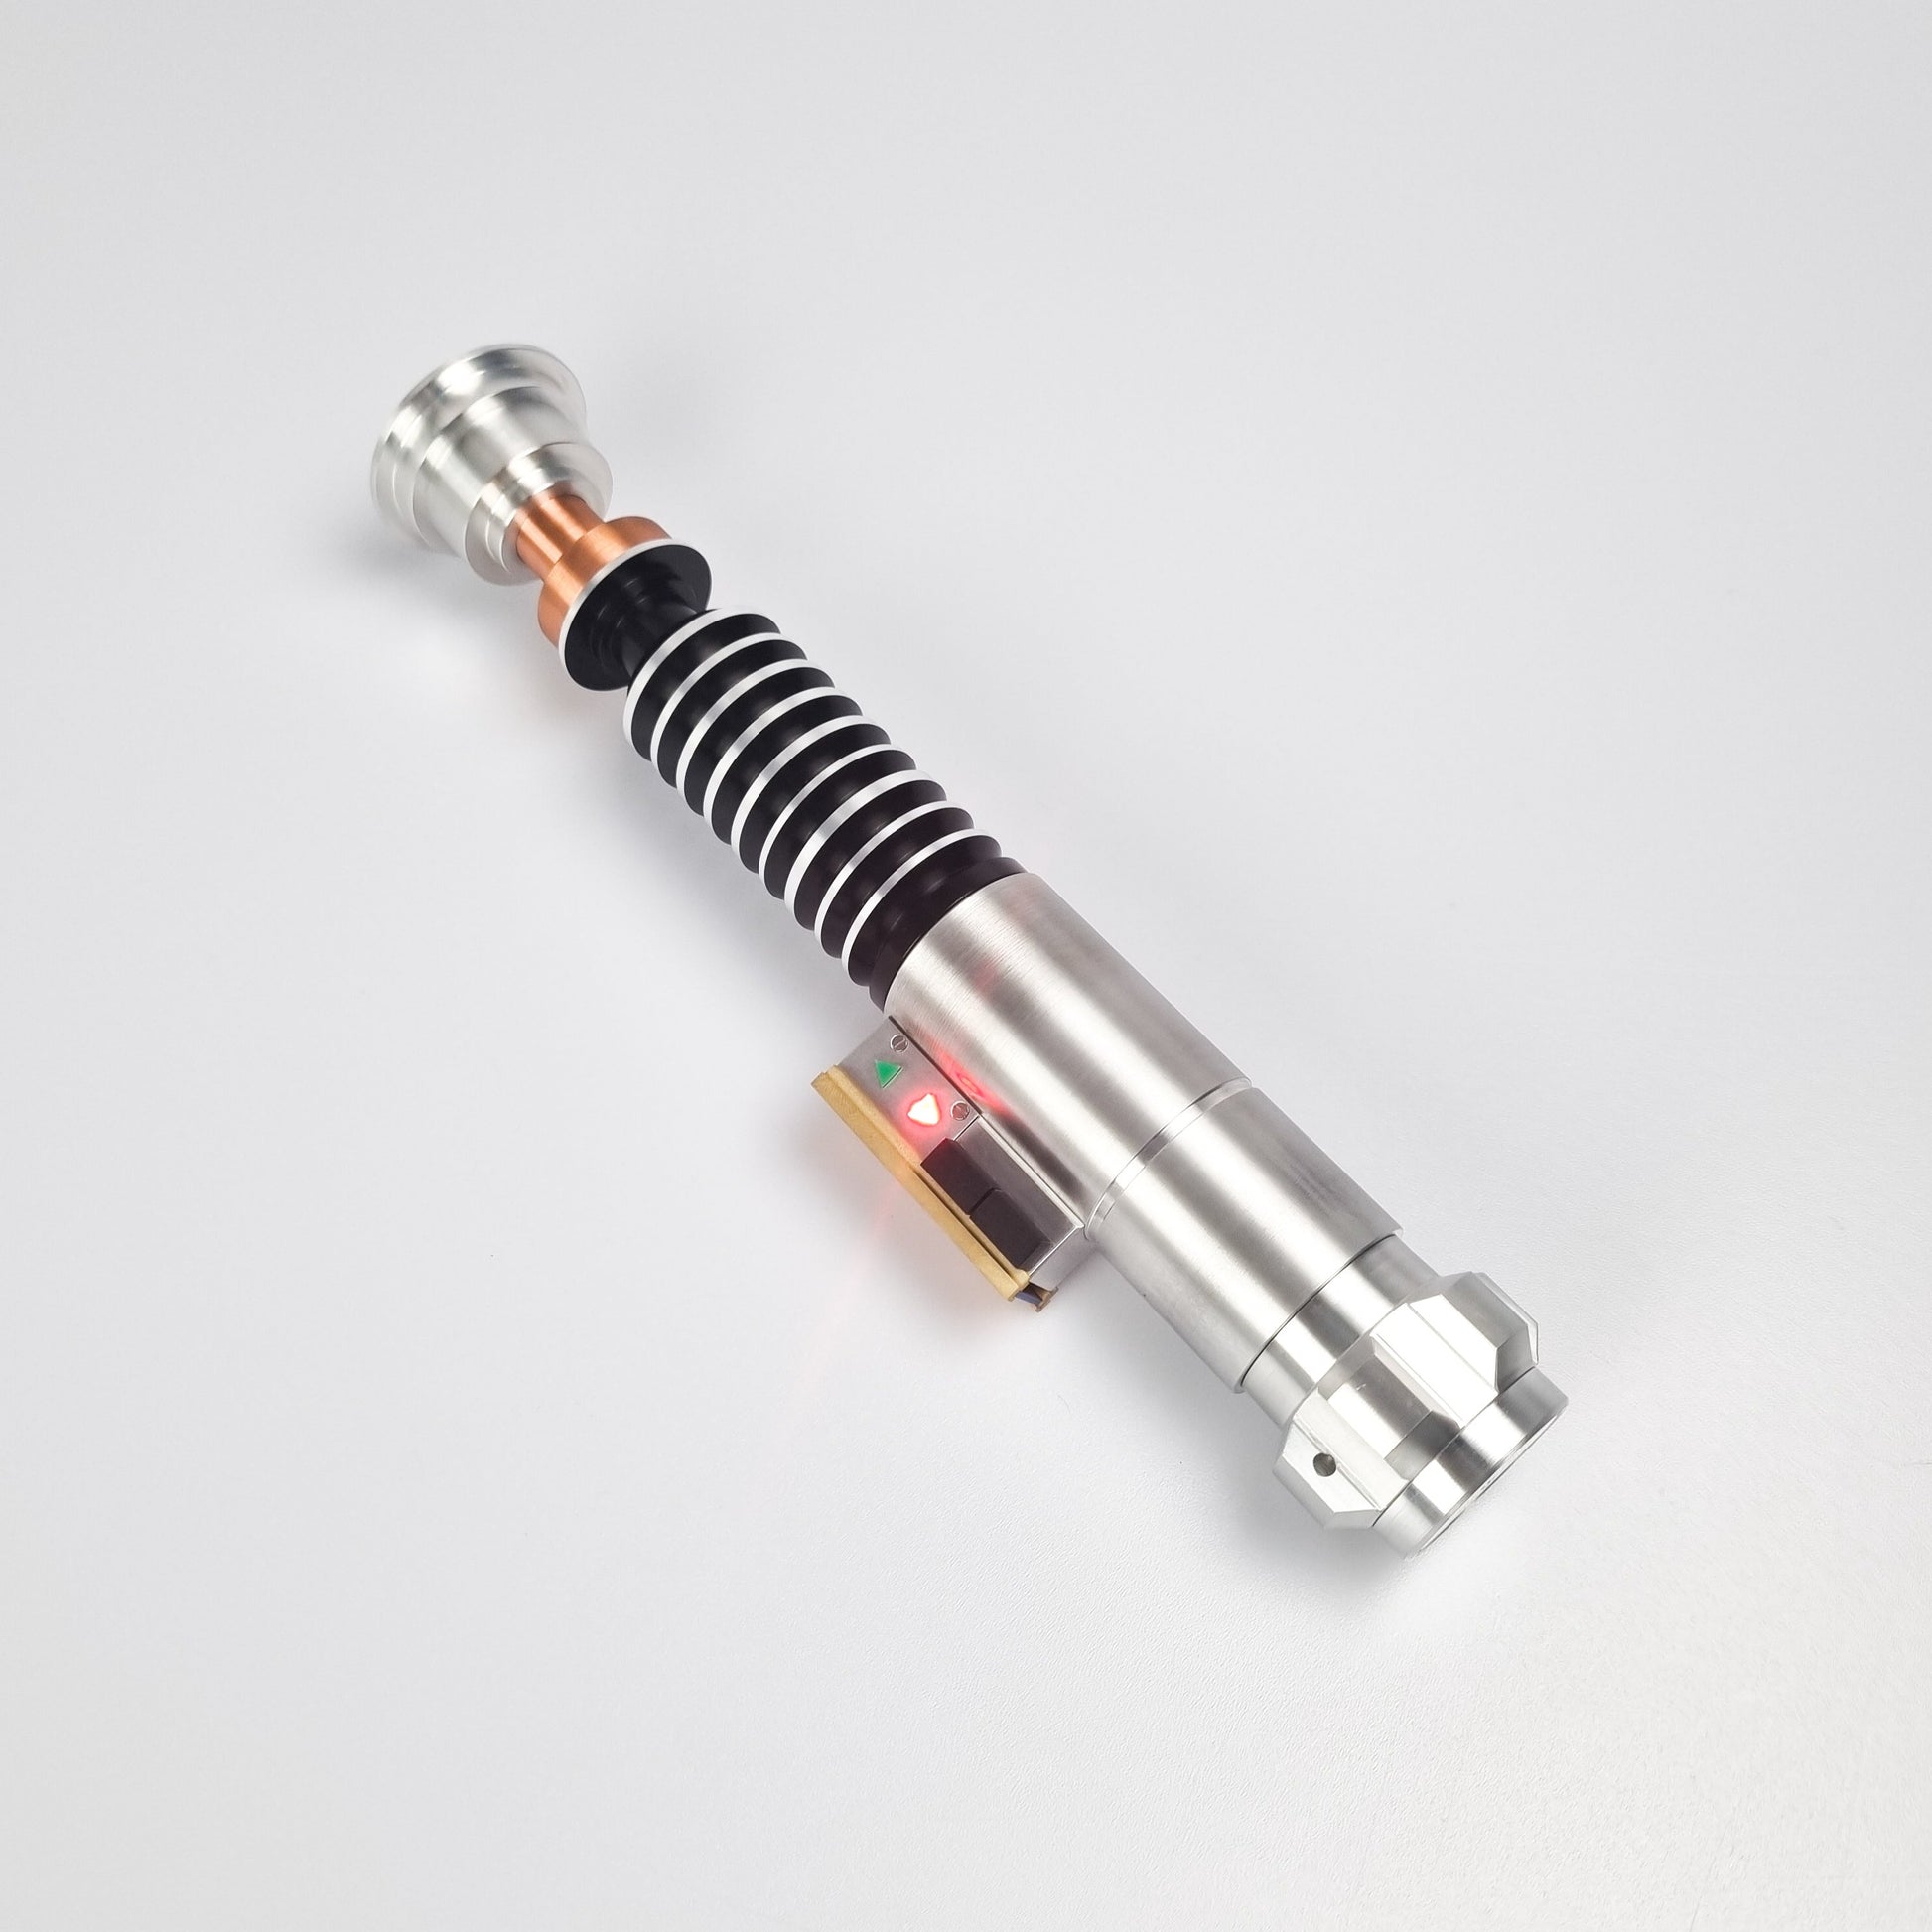 Collectors Edition Lightsaber - Collectors Edition Saber - MoM of all Heroes Gen 2 by Veracity Labs Luke Skywalker - Padawan Outpost